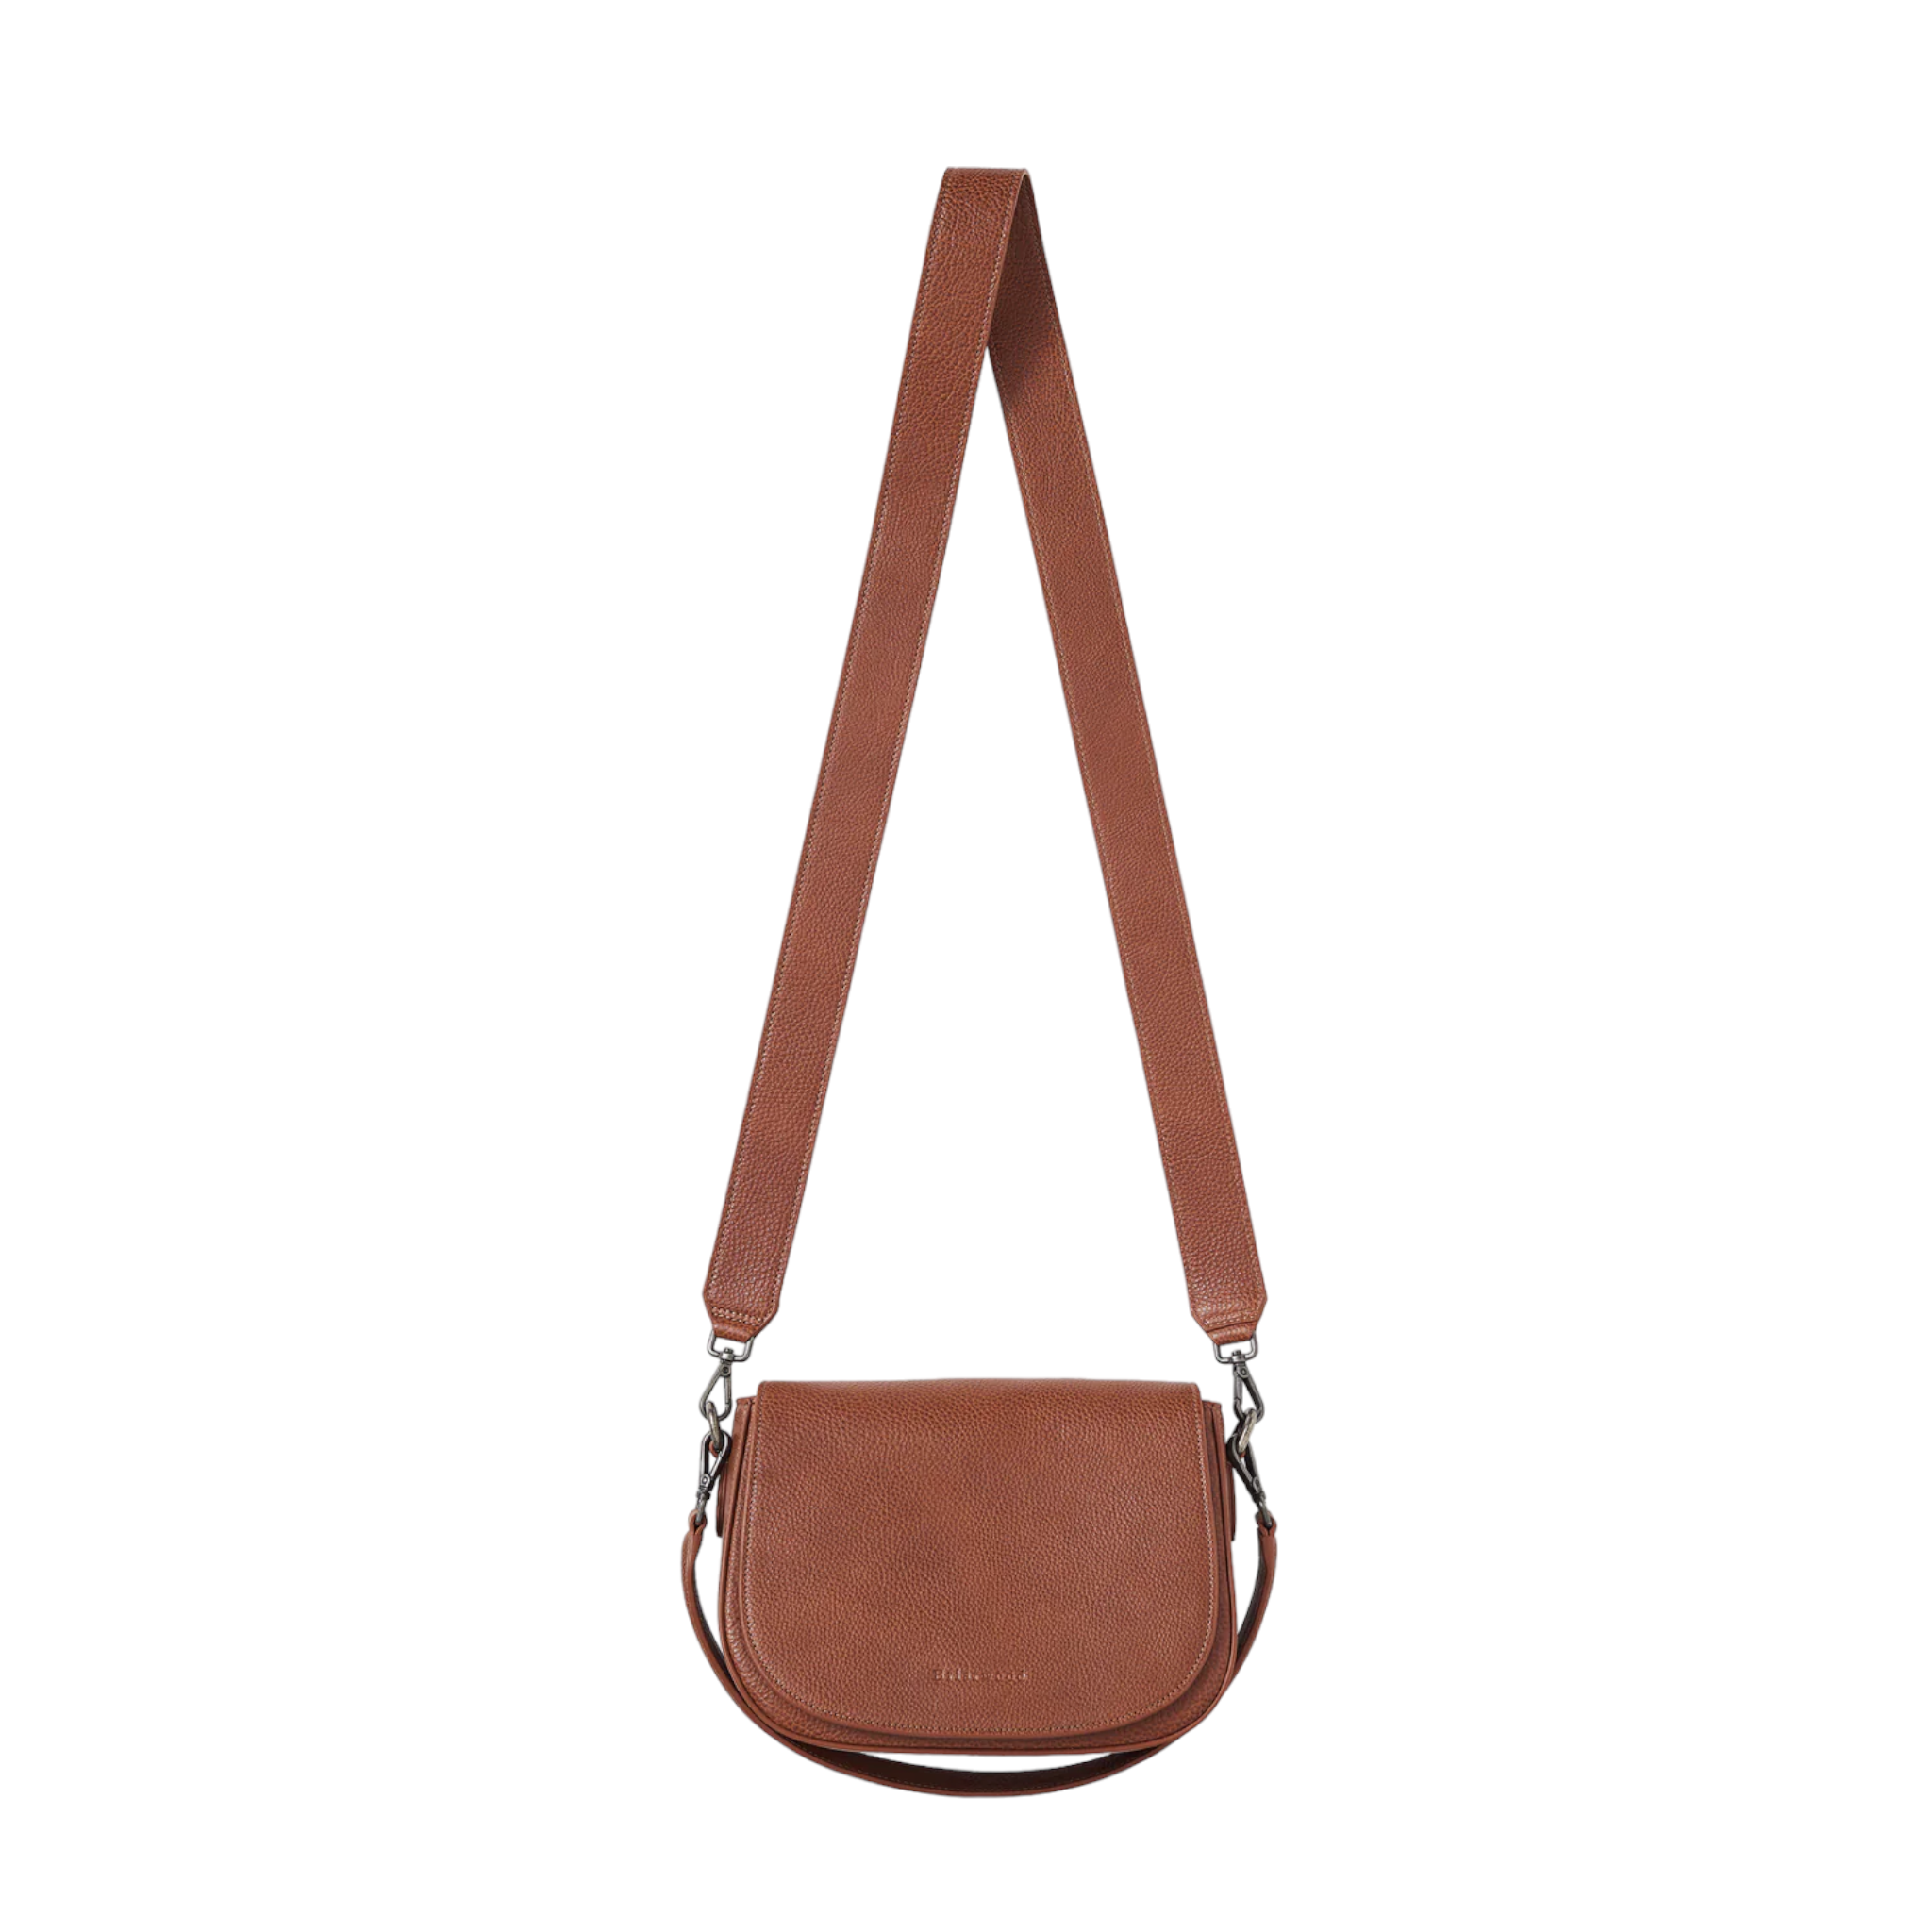 Front view of Quintana Briarwood Chestnut coloured handbag. Crafted with fine leather, with a shoulder strap and a short strap.